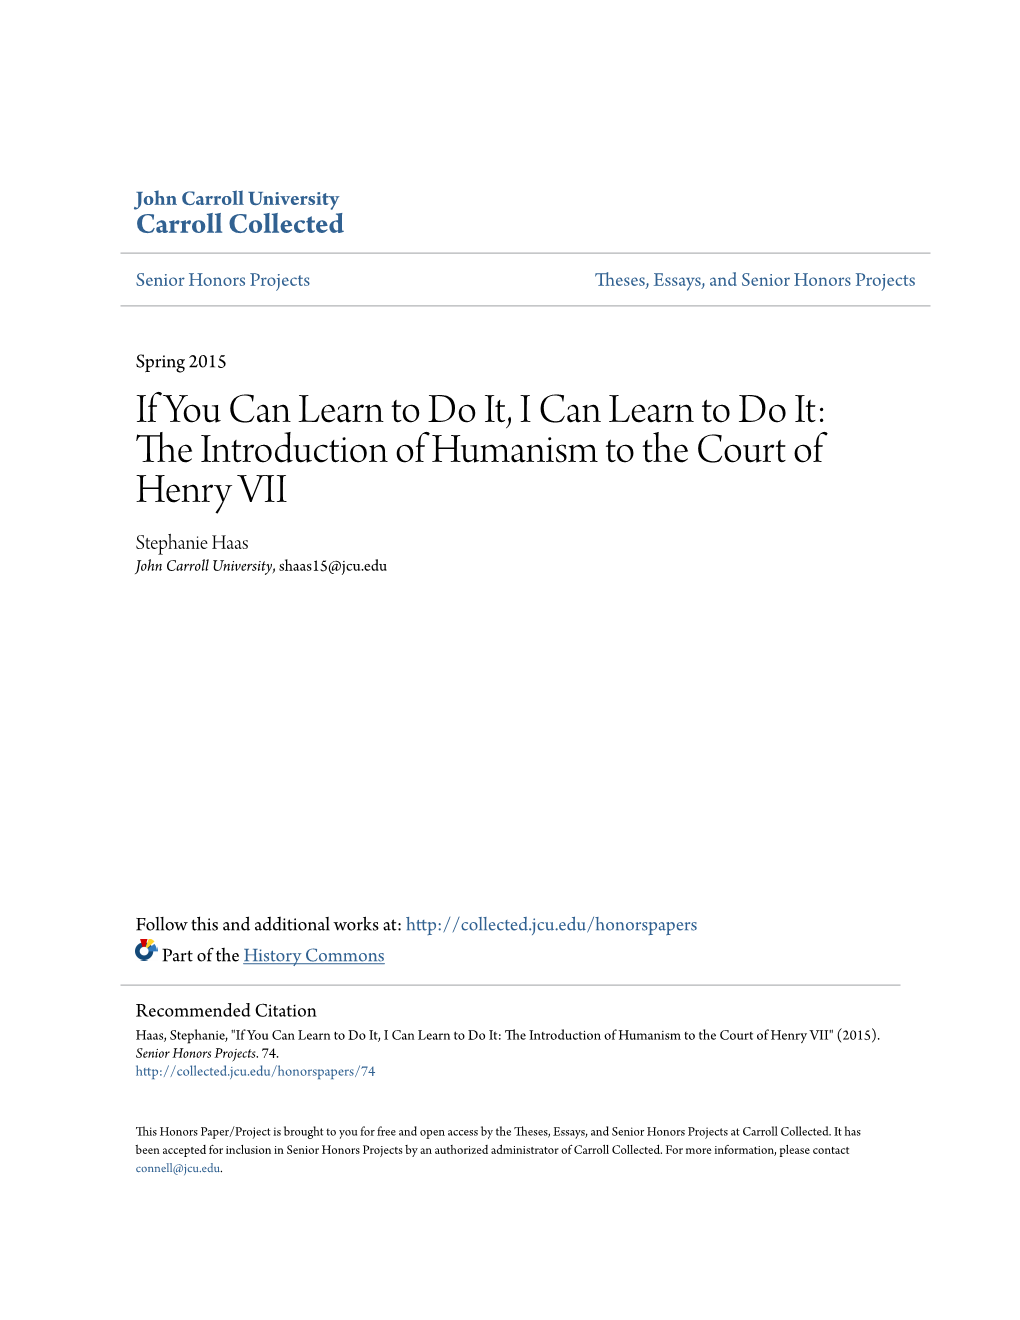 The Introduction of Humanism to the Court of Henry